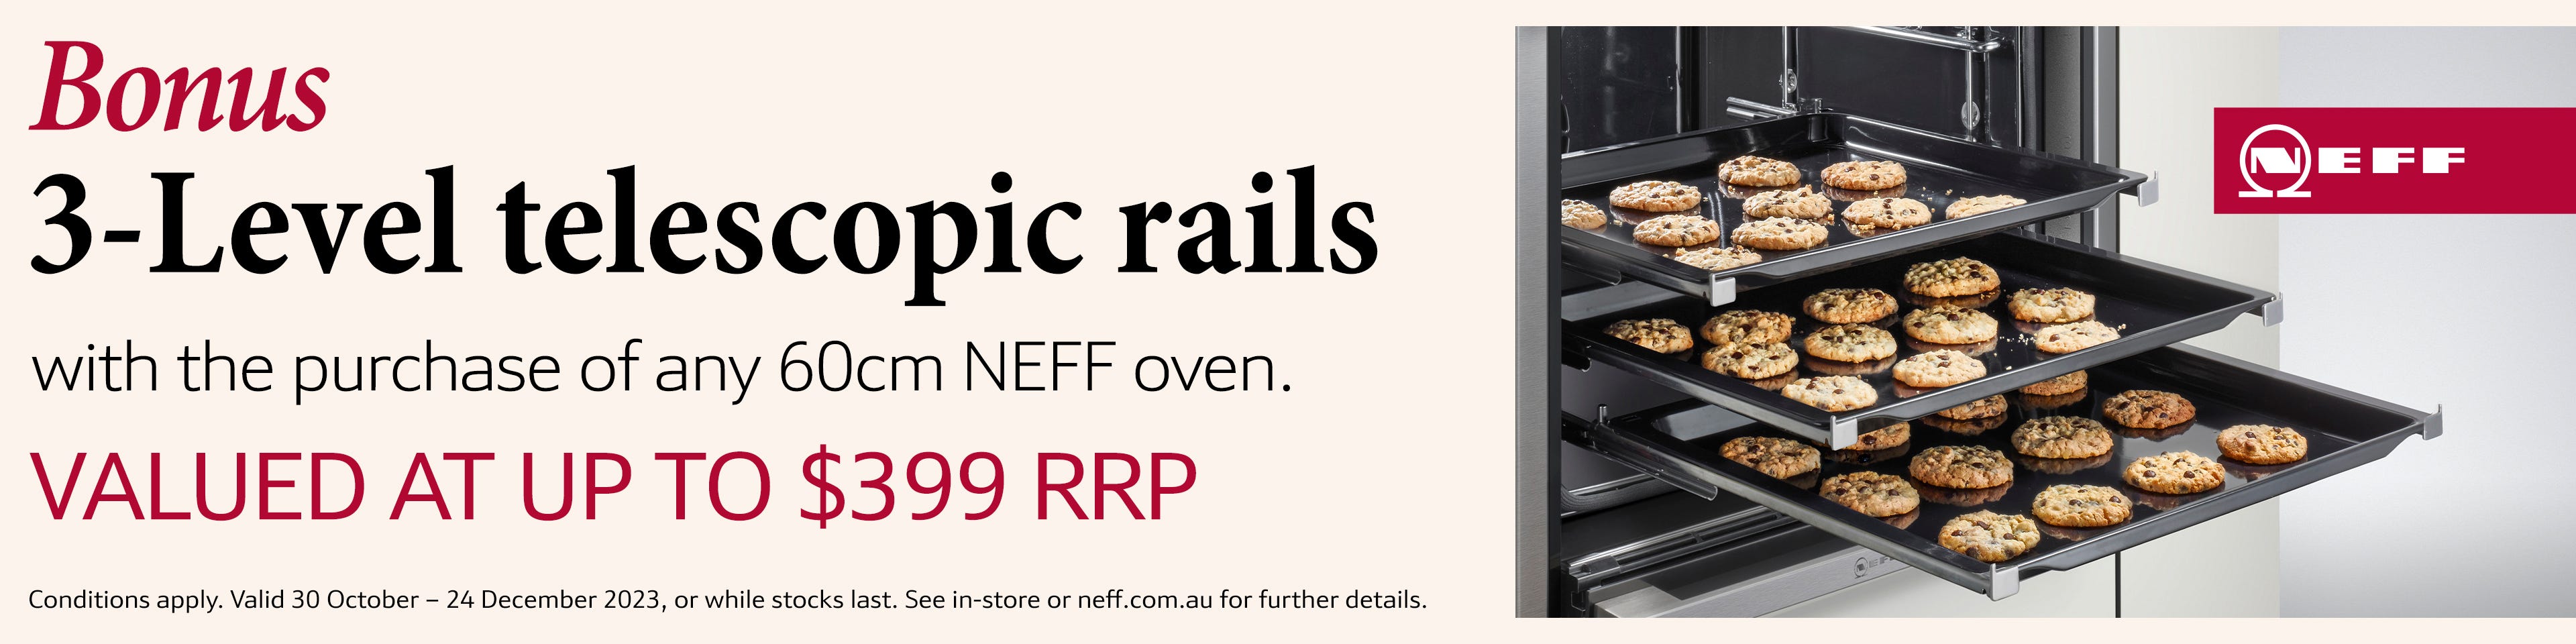 Bonus 3 level telescopic rails with the purchase of any of these 60cm* NEFF ovens. T&Cs apply. Offer ends 24/12/23. At an e&s near you.